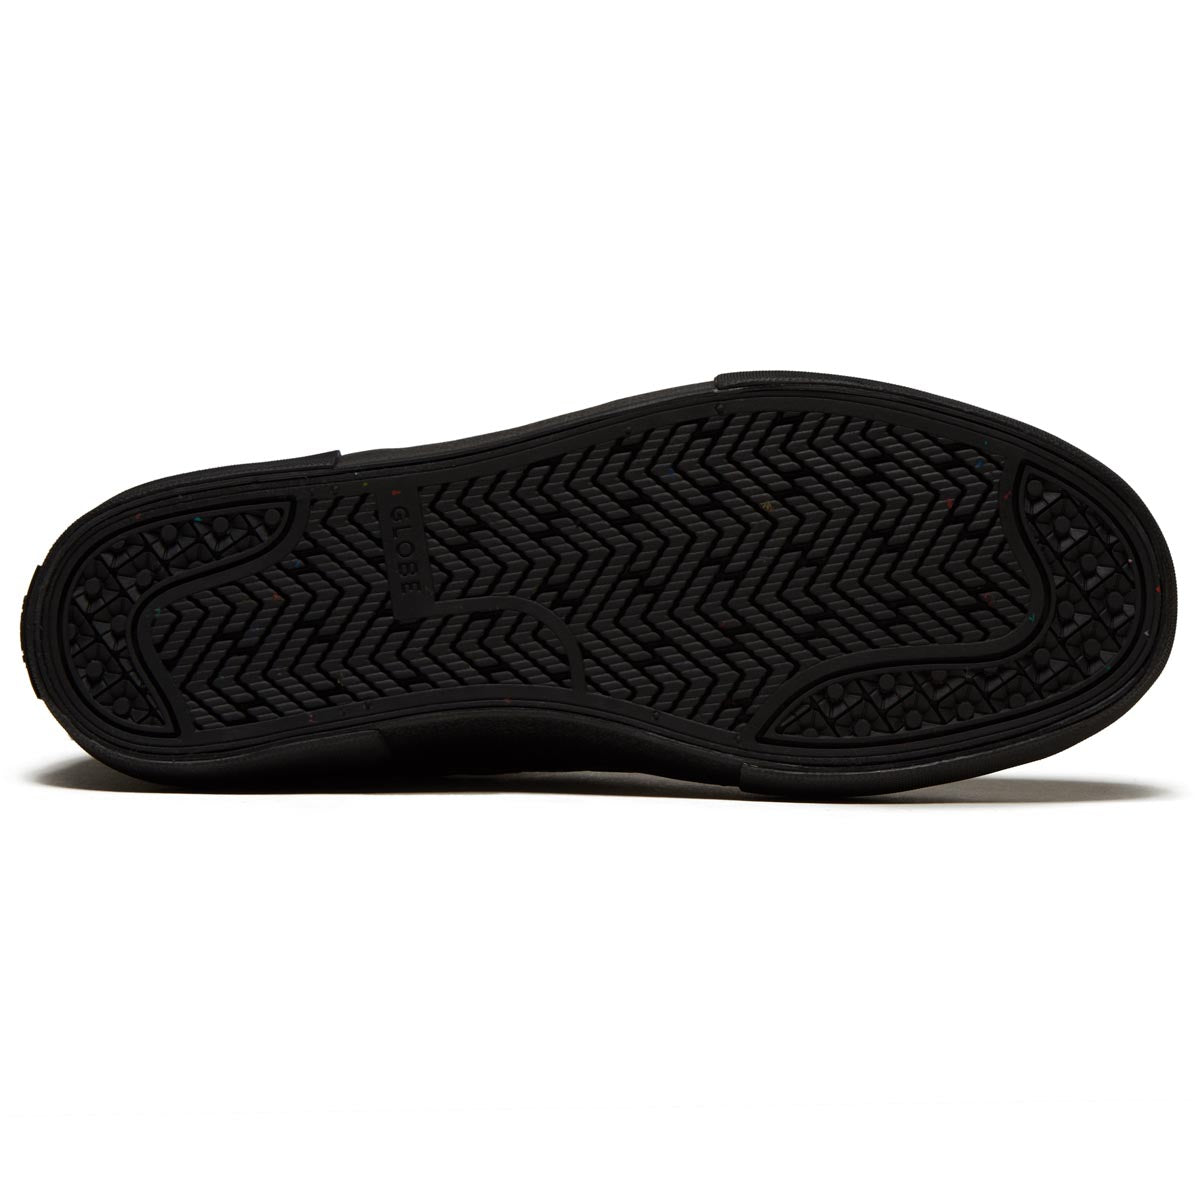 Globe Dover II Shoes - Black Croc/Wasted Talent image 4